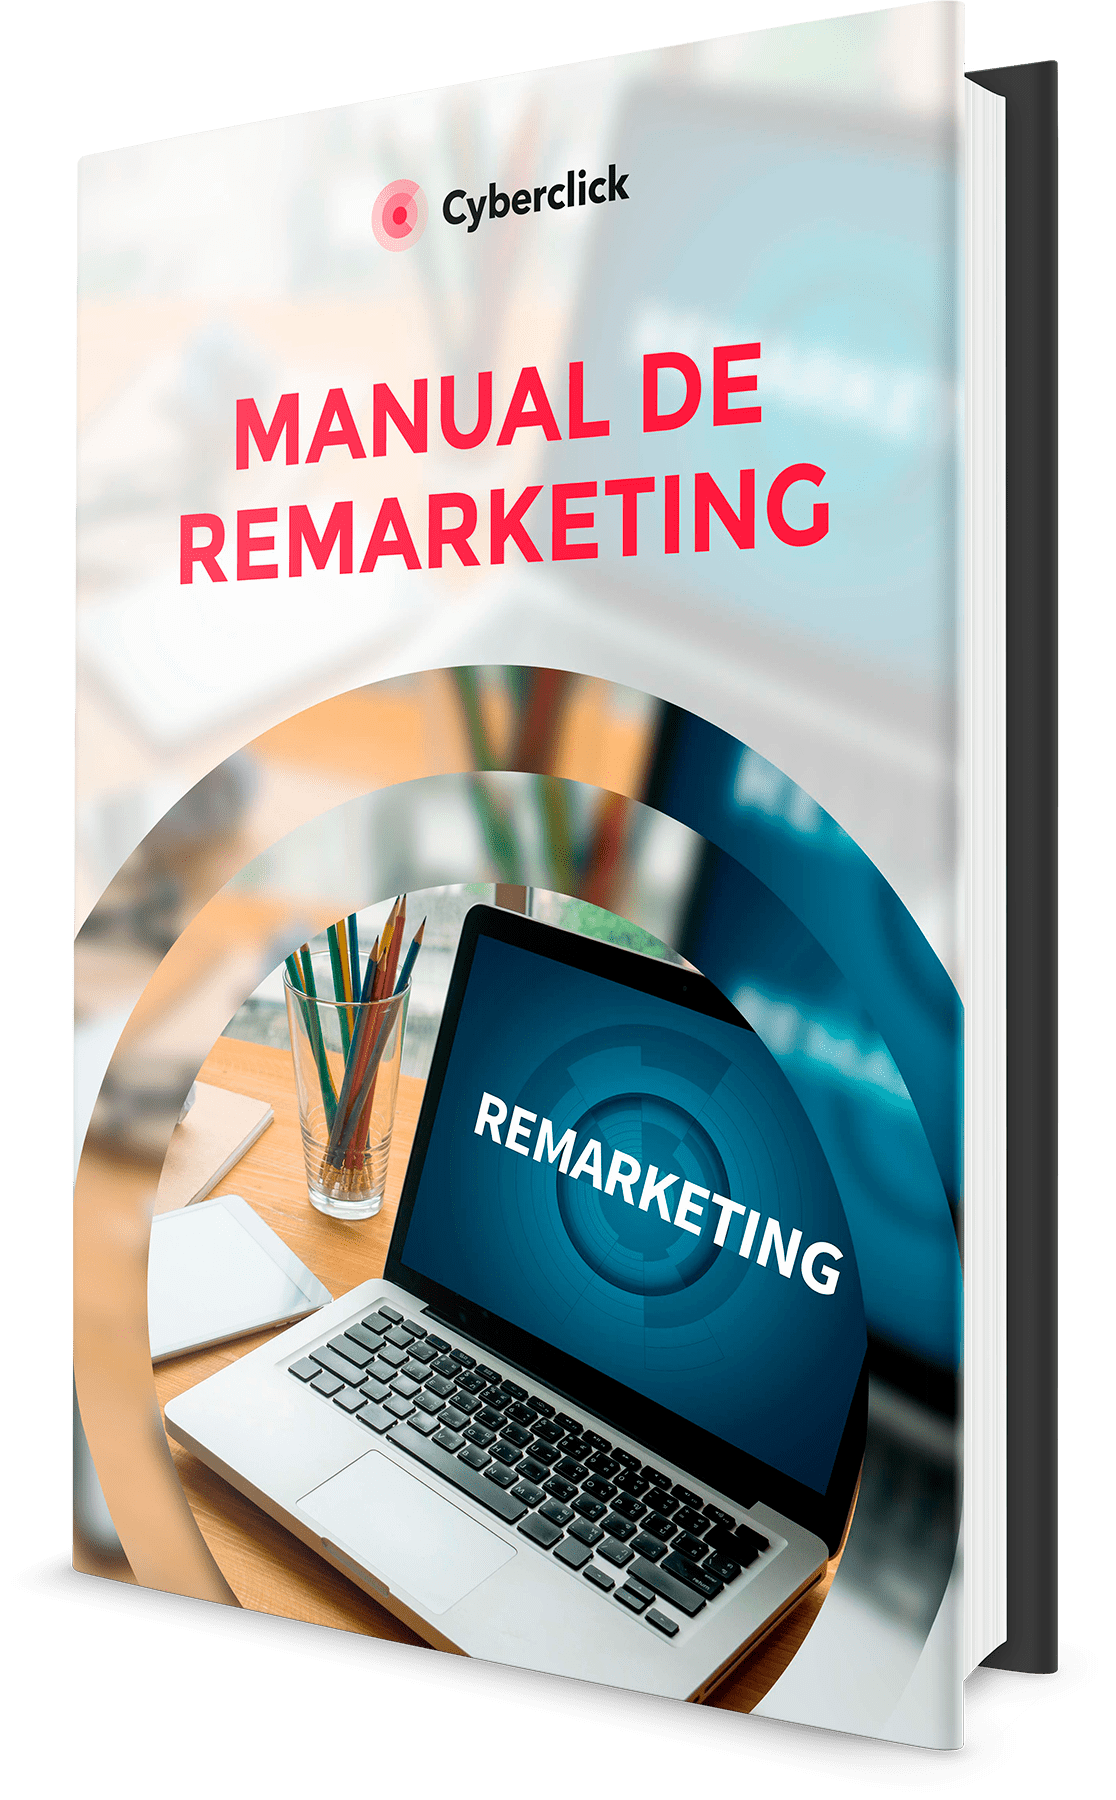 Cover ebook Remarketing-min.png